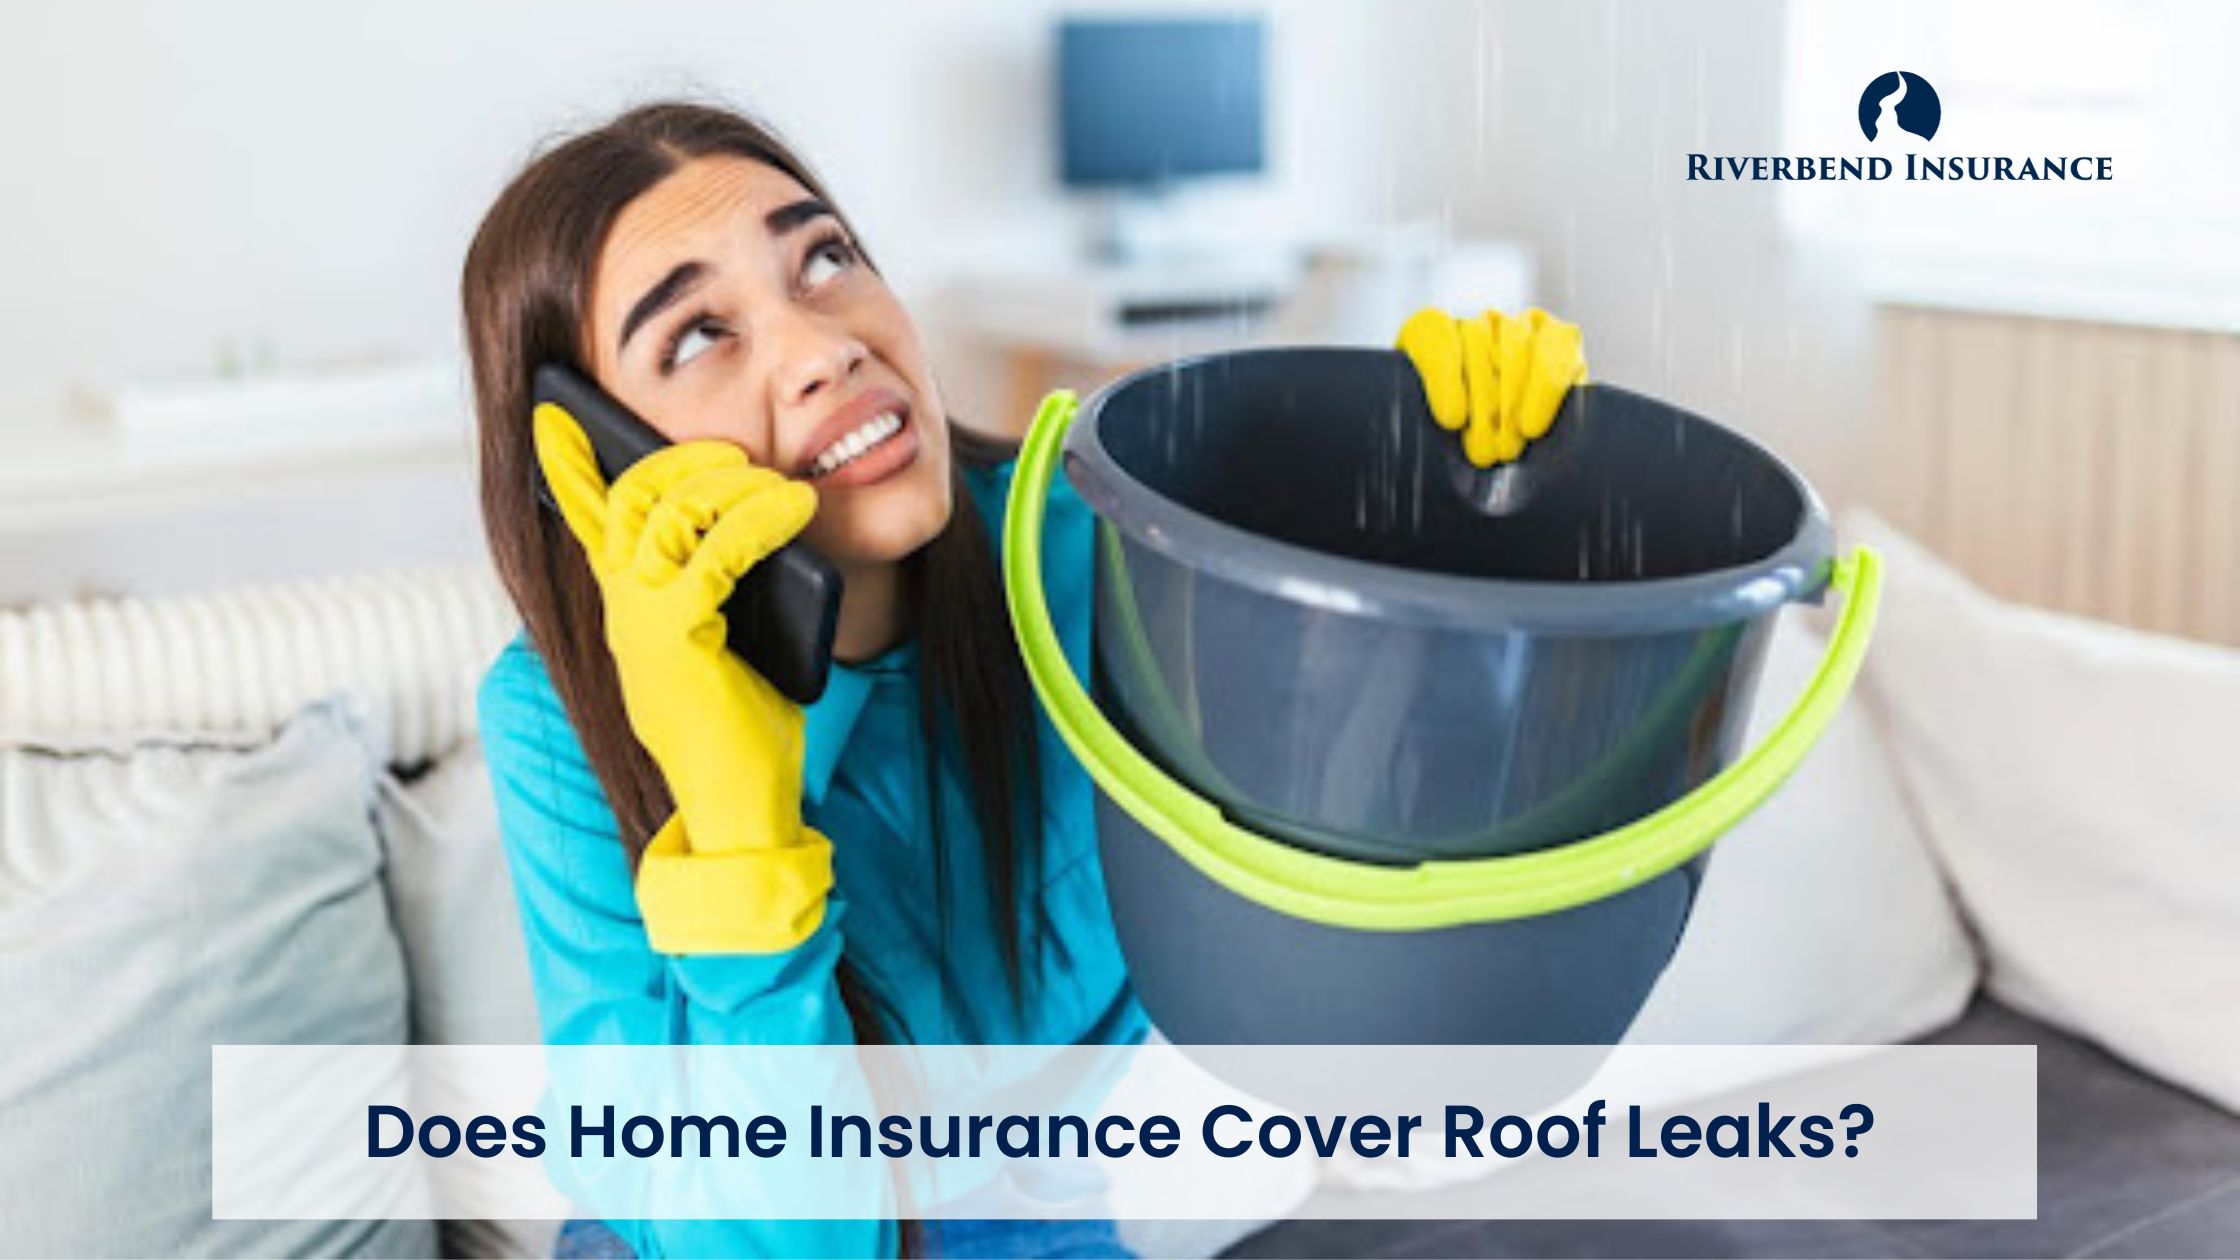 Is Your Home Insurance Roof Leak Ready? Here's What You Need to Know